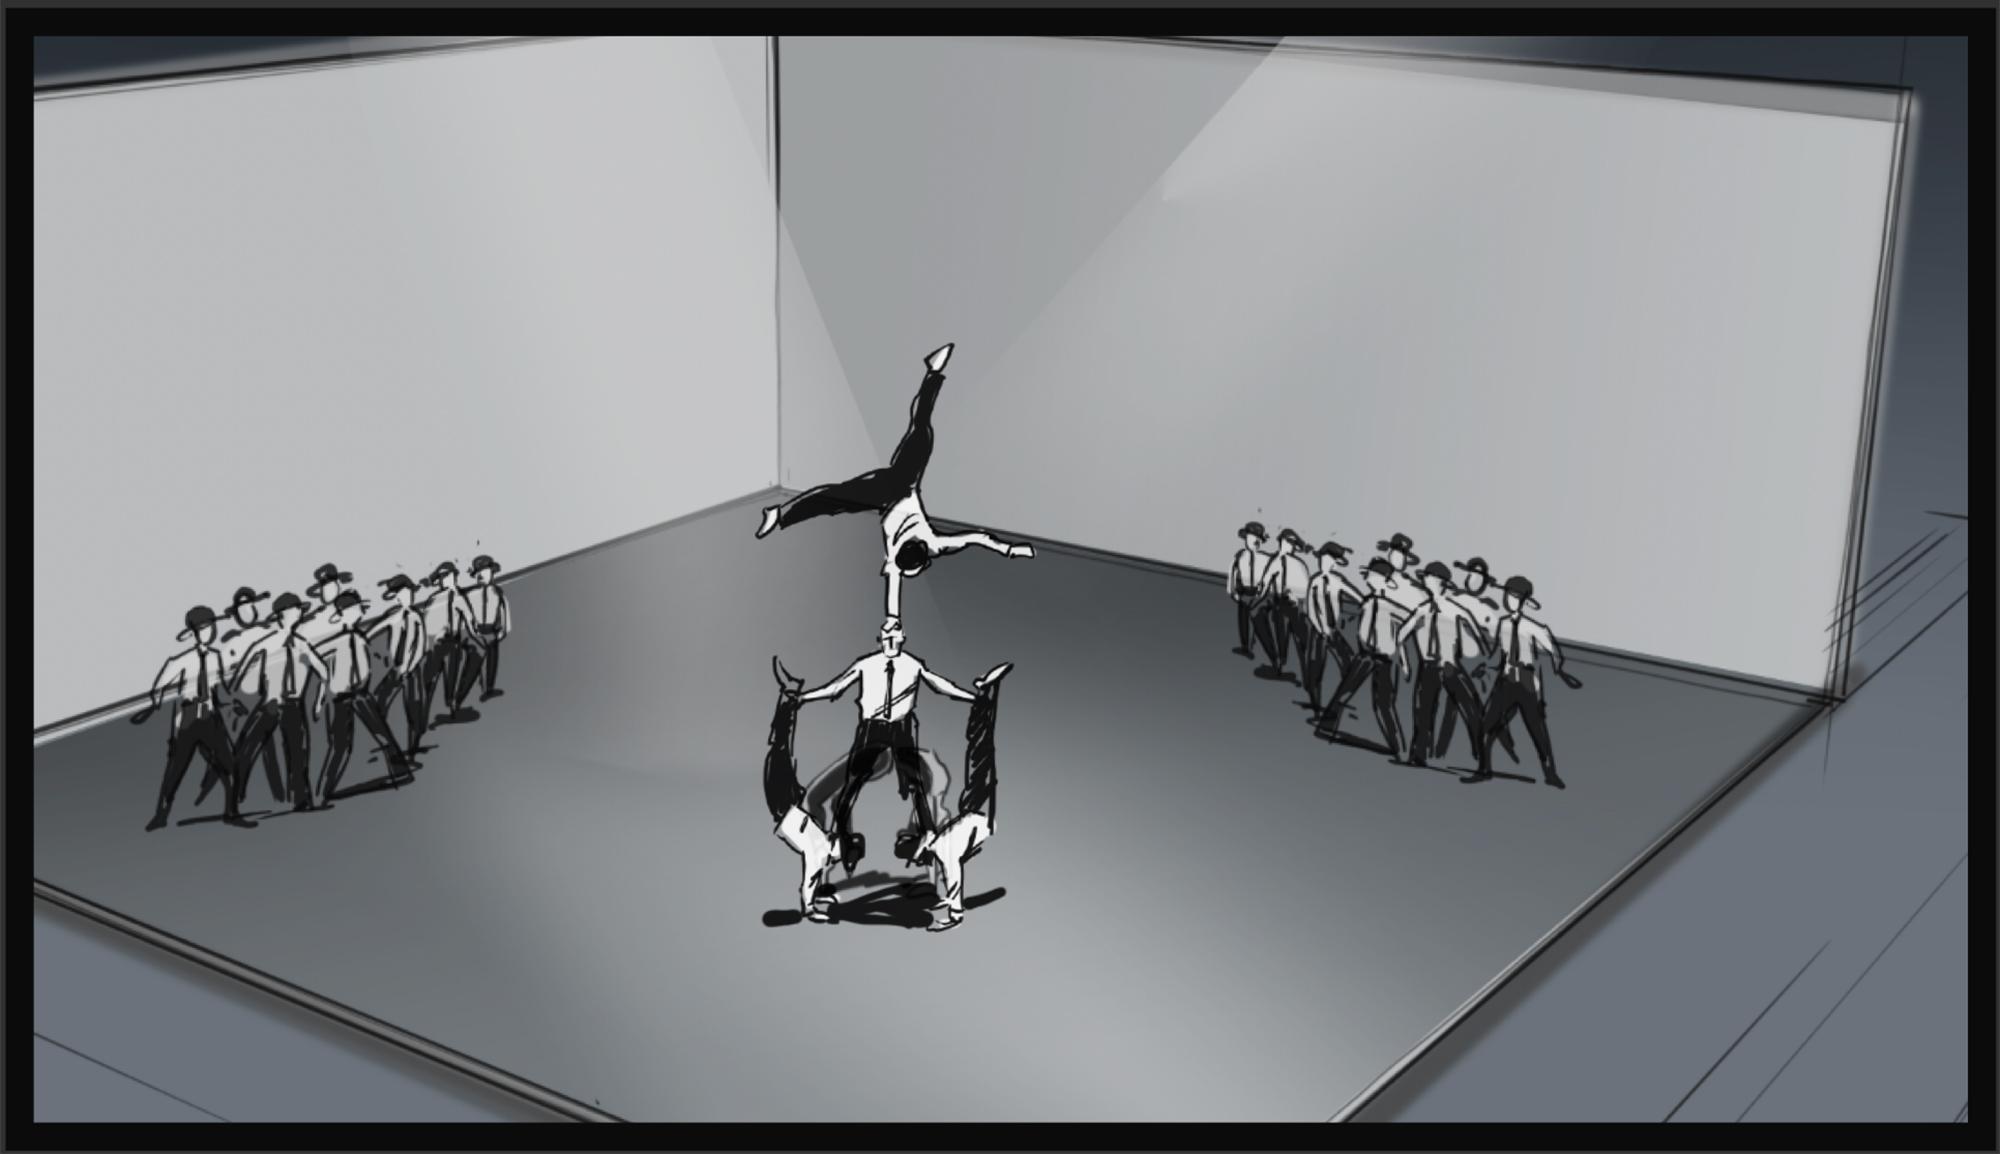 A sketch of the American Express stage. 2 groups of dancers face towards a group where an acrobat is doing a one handed handstand on someone's head, who is standing on two other people who are also doing handstands.